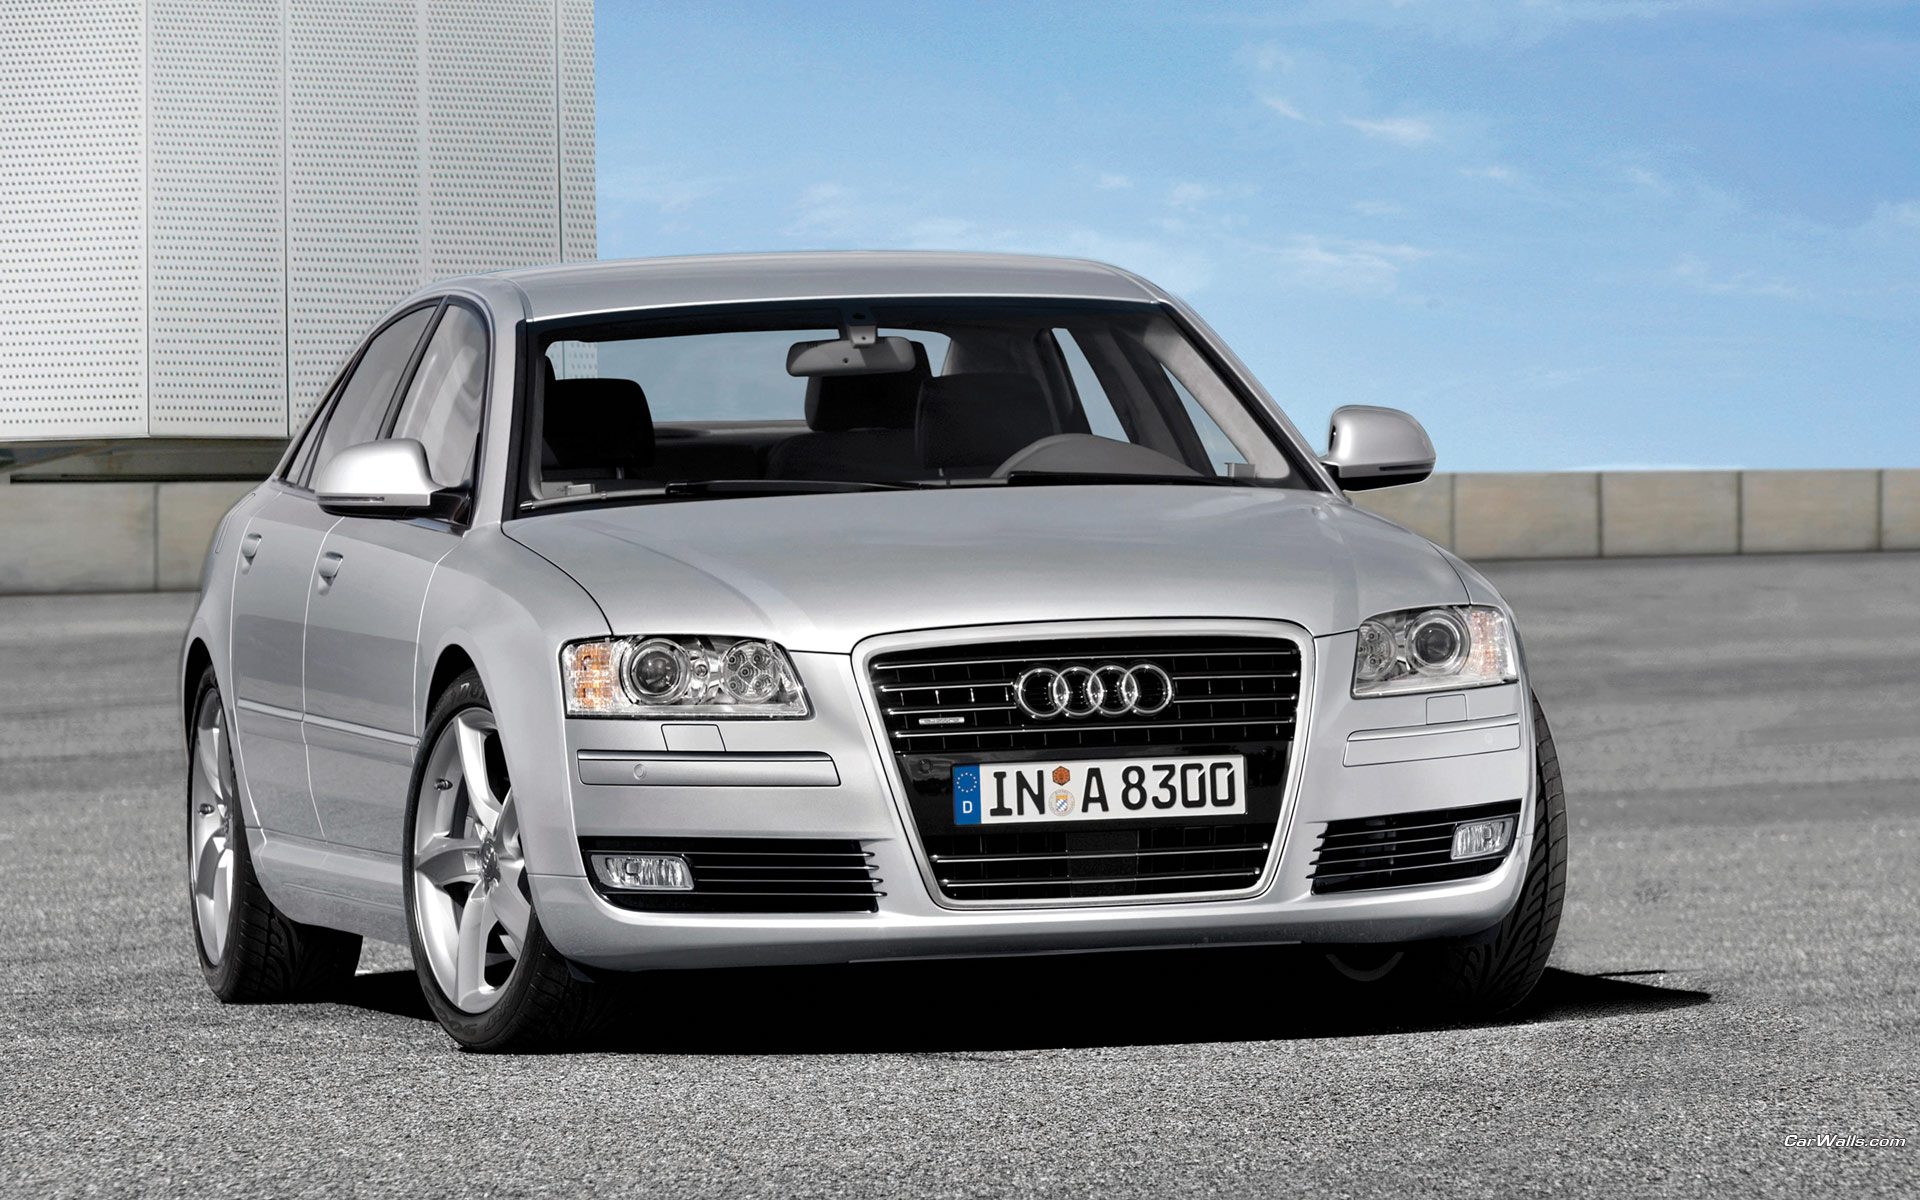 Download full size A8 2008 front Audi wallpaper / 1920x1200